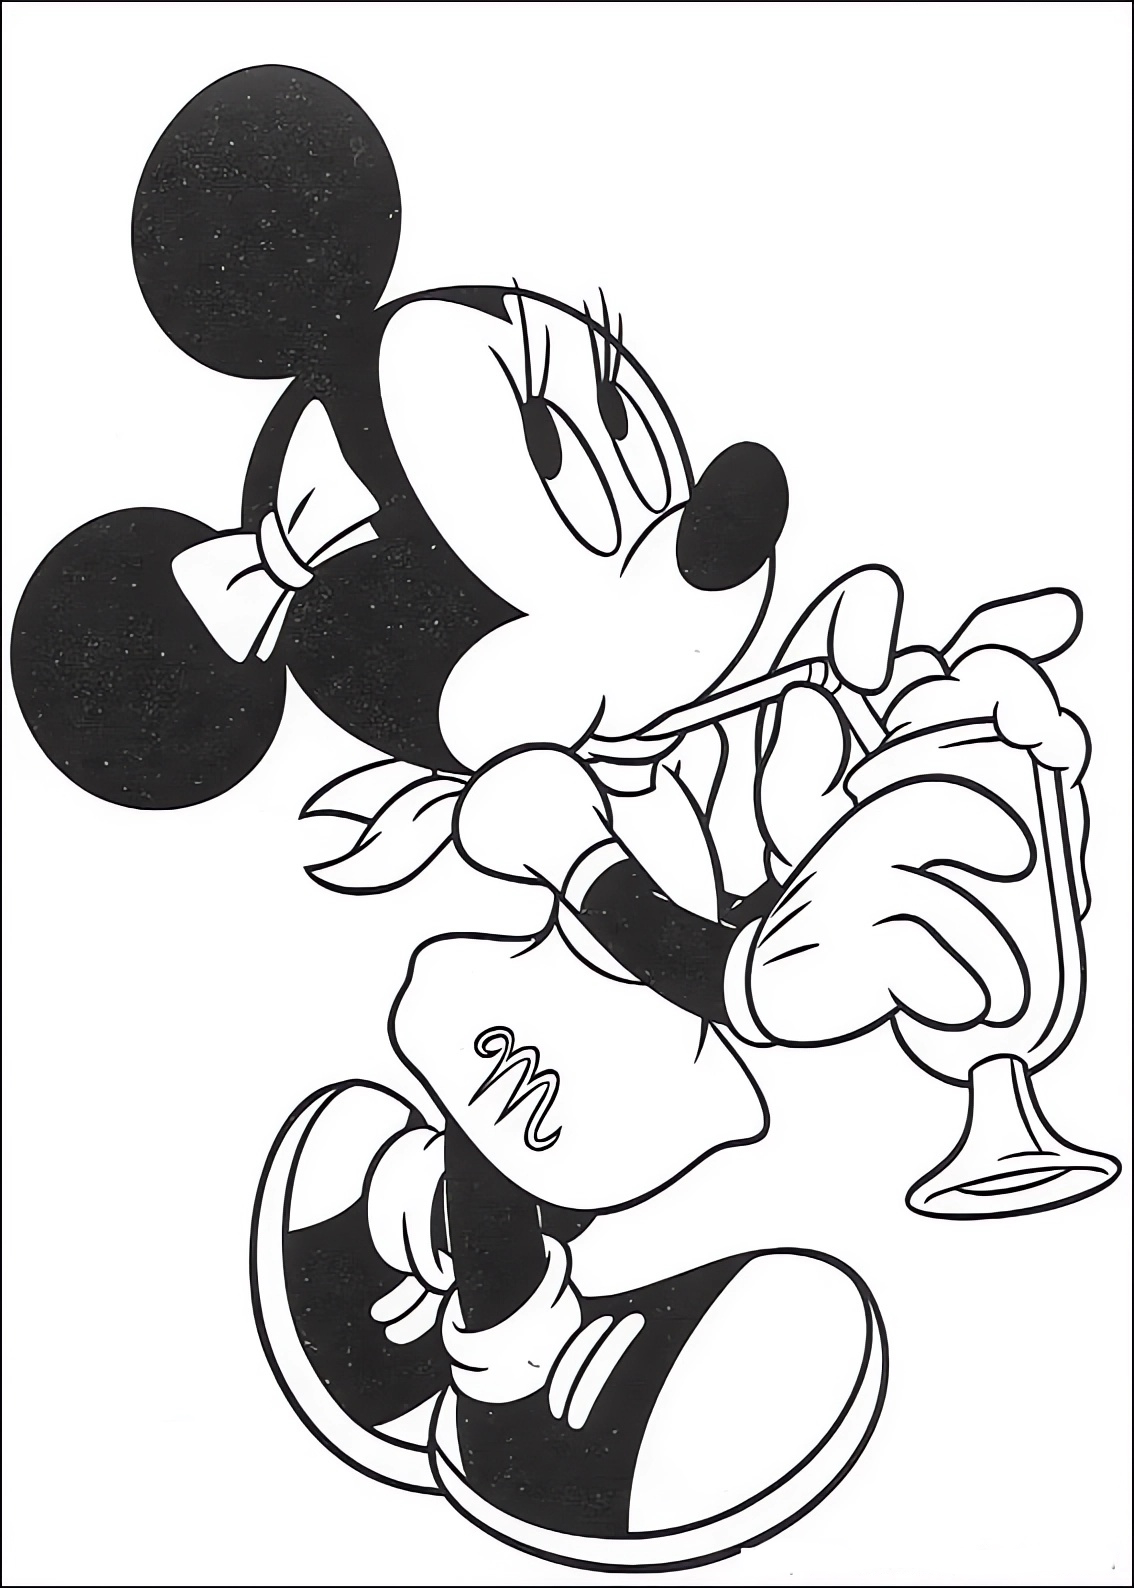 Coloring page of Minnie drinking juice